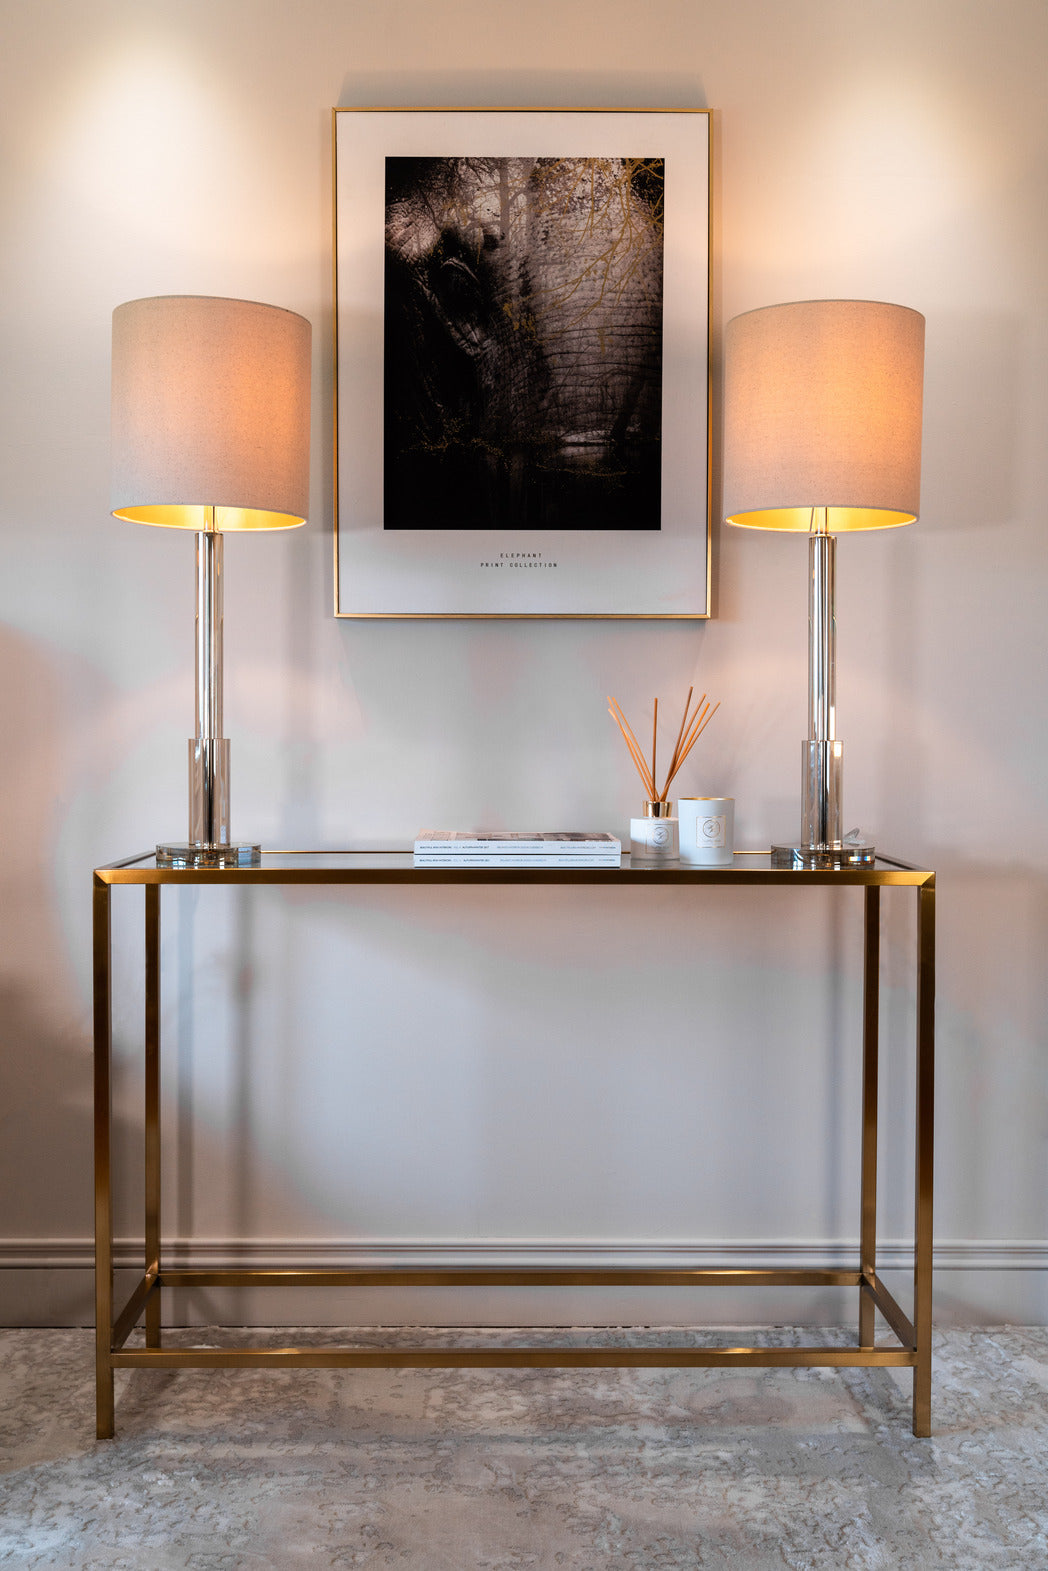 Clear glass, gold beveled edging, gold console table, Console table, gold table, Interior design, Furniture, Decor